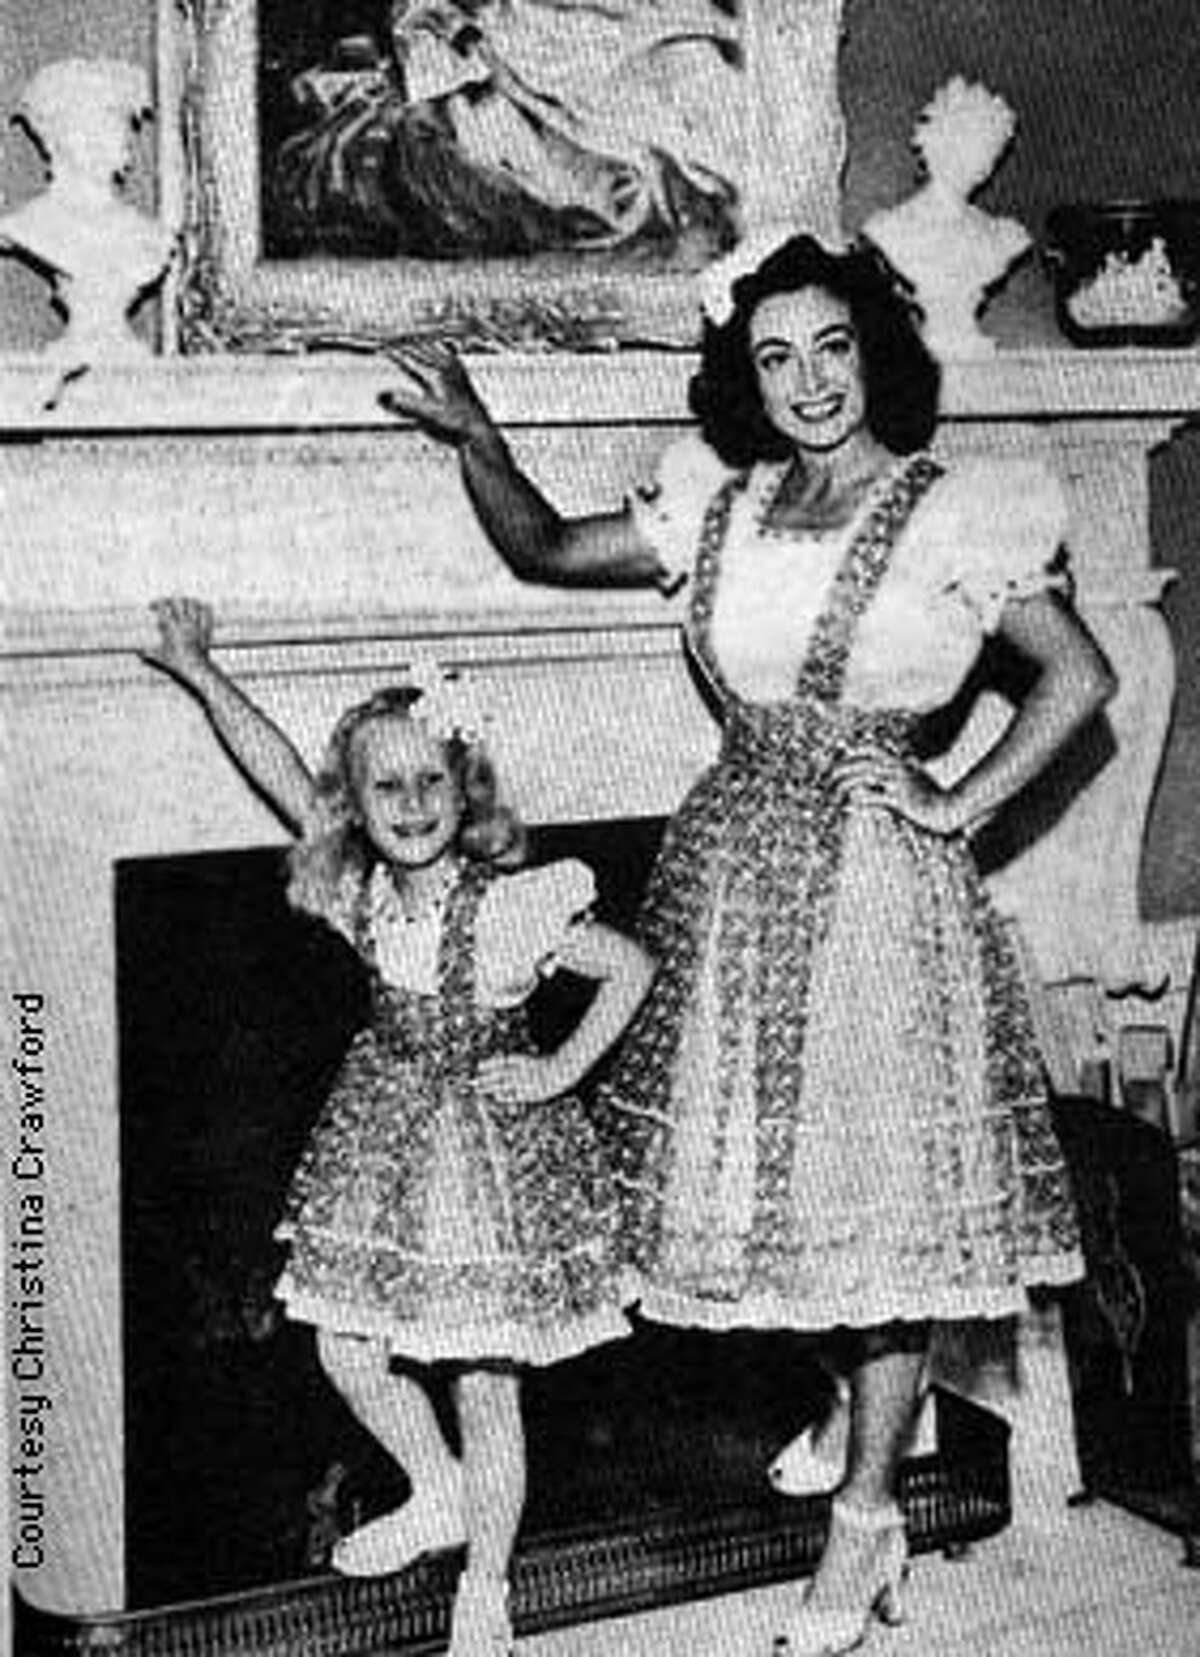 CRAWFORD/B/03DEC97/DD/HO-Joan Crawford (right) and her daughter Christina. COURTESY CHRISTINA CRAWFORD FROM HER BOOK "MOMMIE DEAREST"